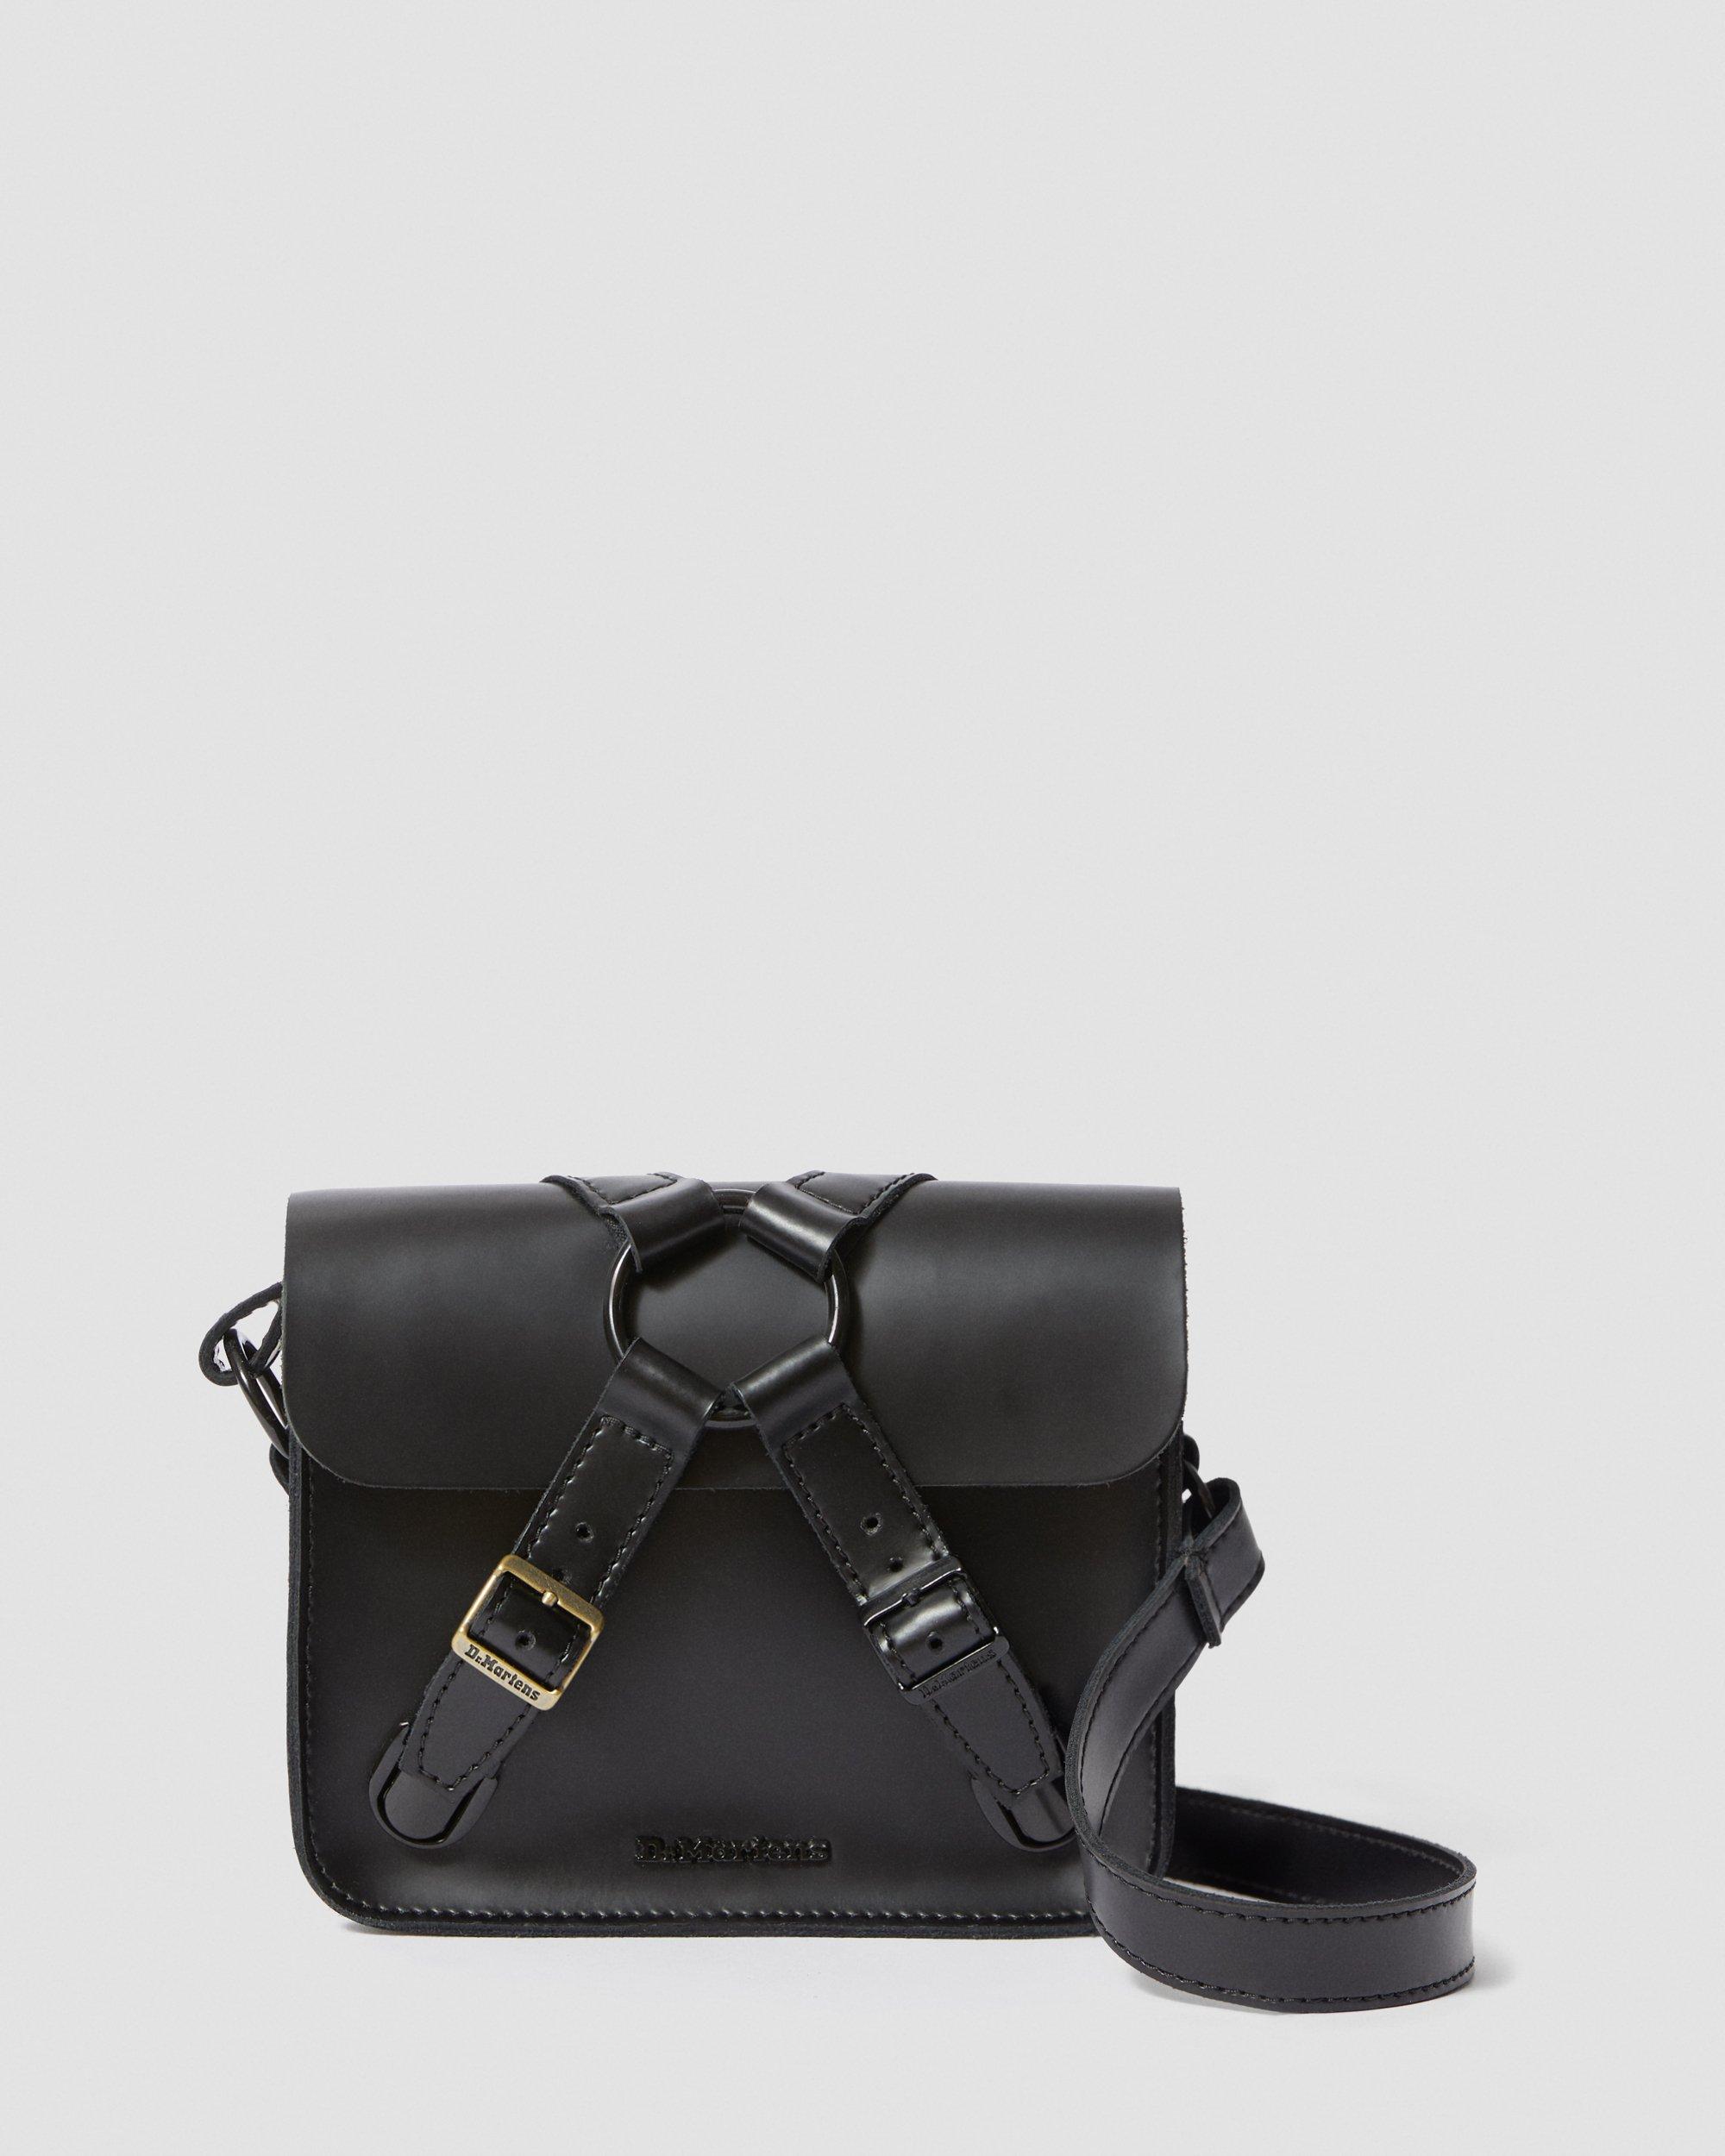 7 Inch Leather Buckle Satchel in Black